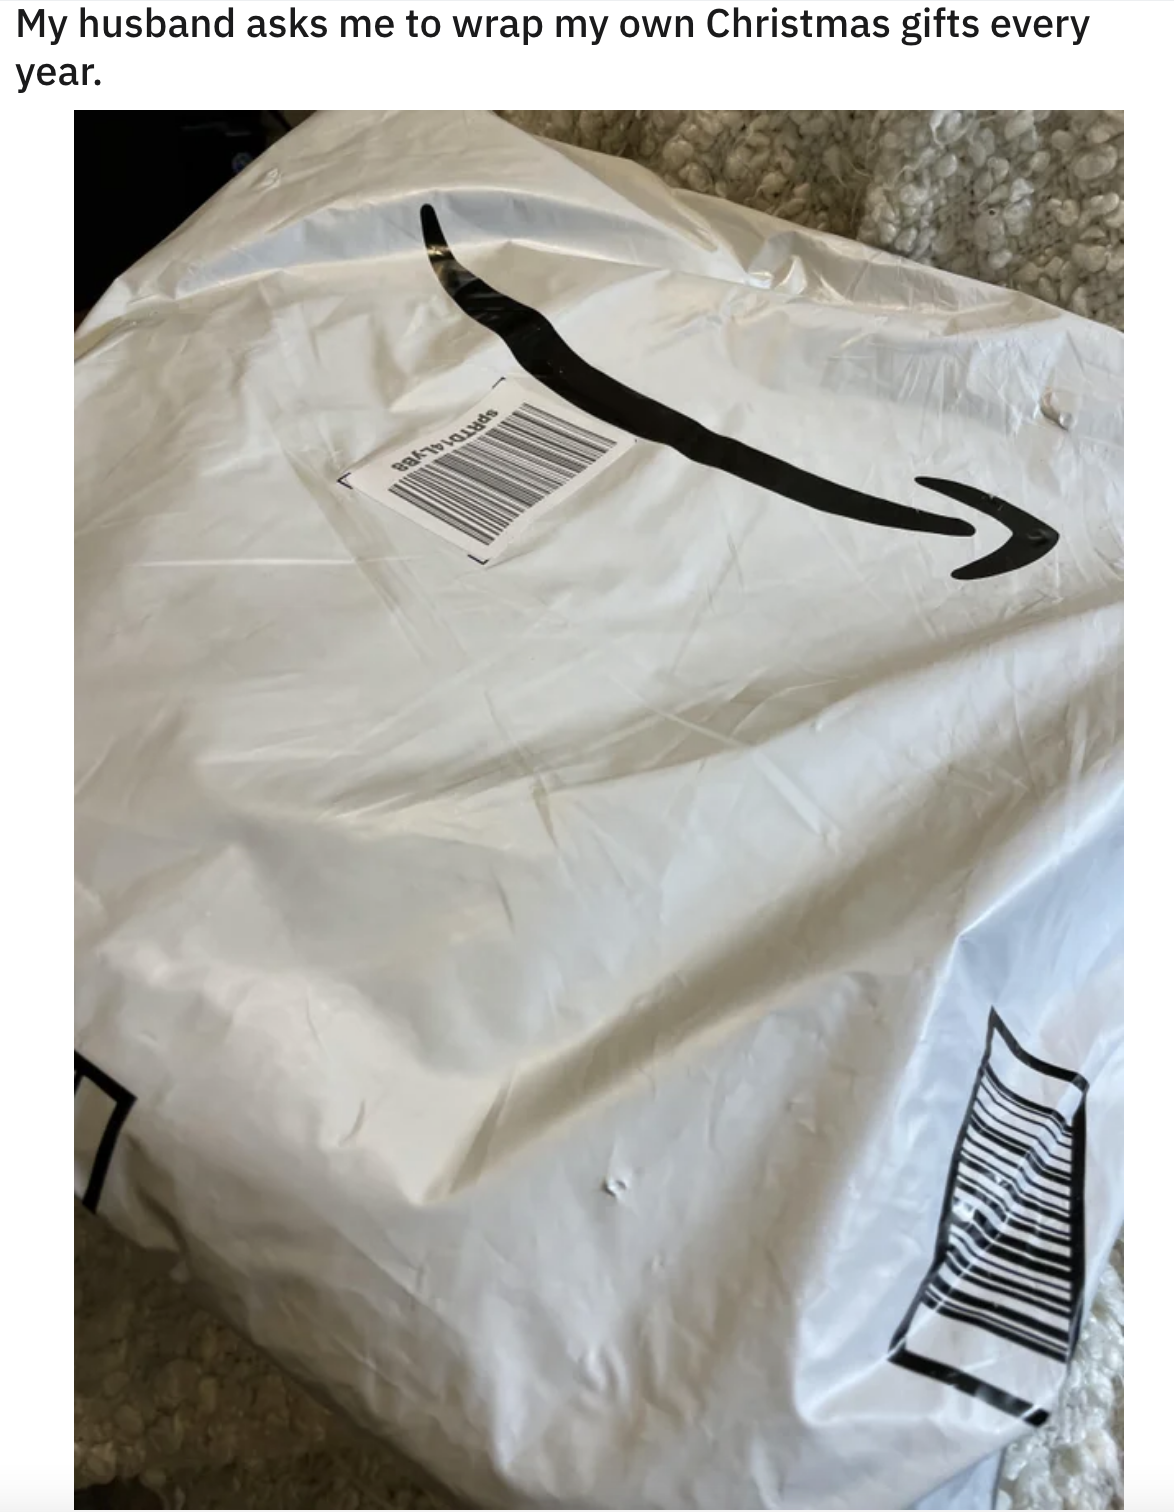 A photo of an Amazon delivery with text saying that the picture taker&#x27;s husband asks them to wrap their own Christmas gift every year